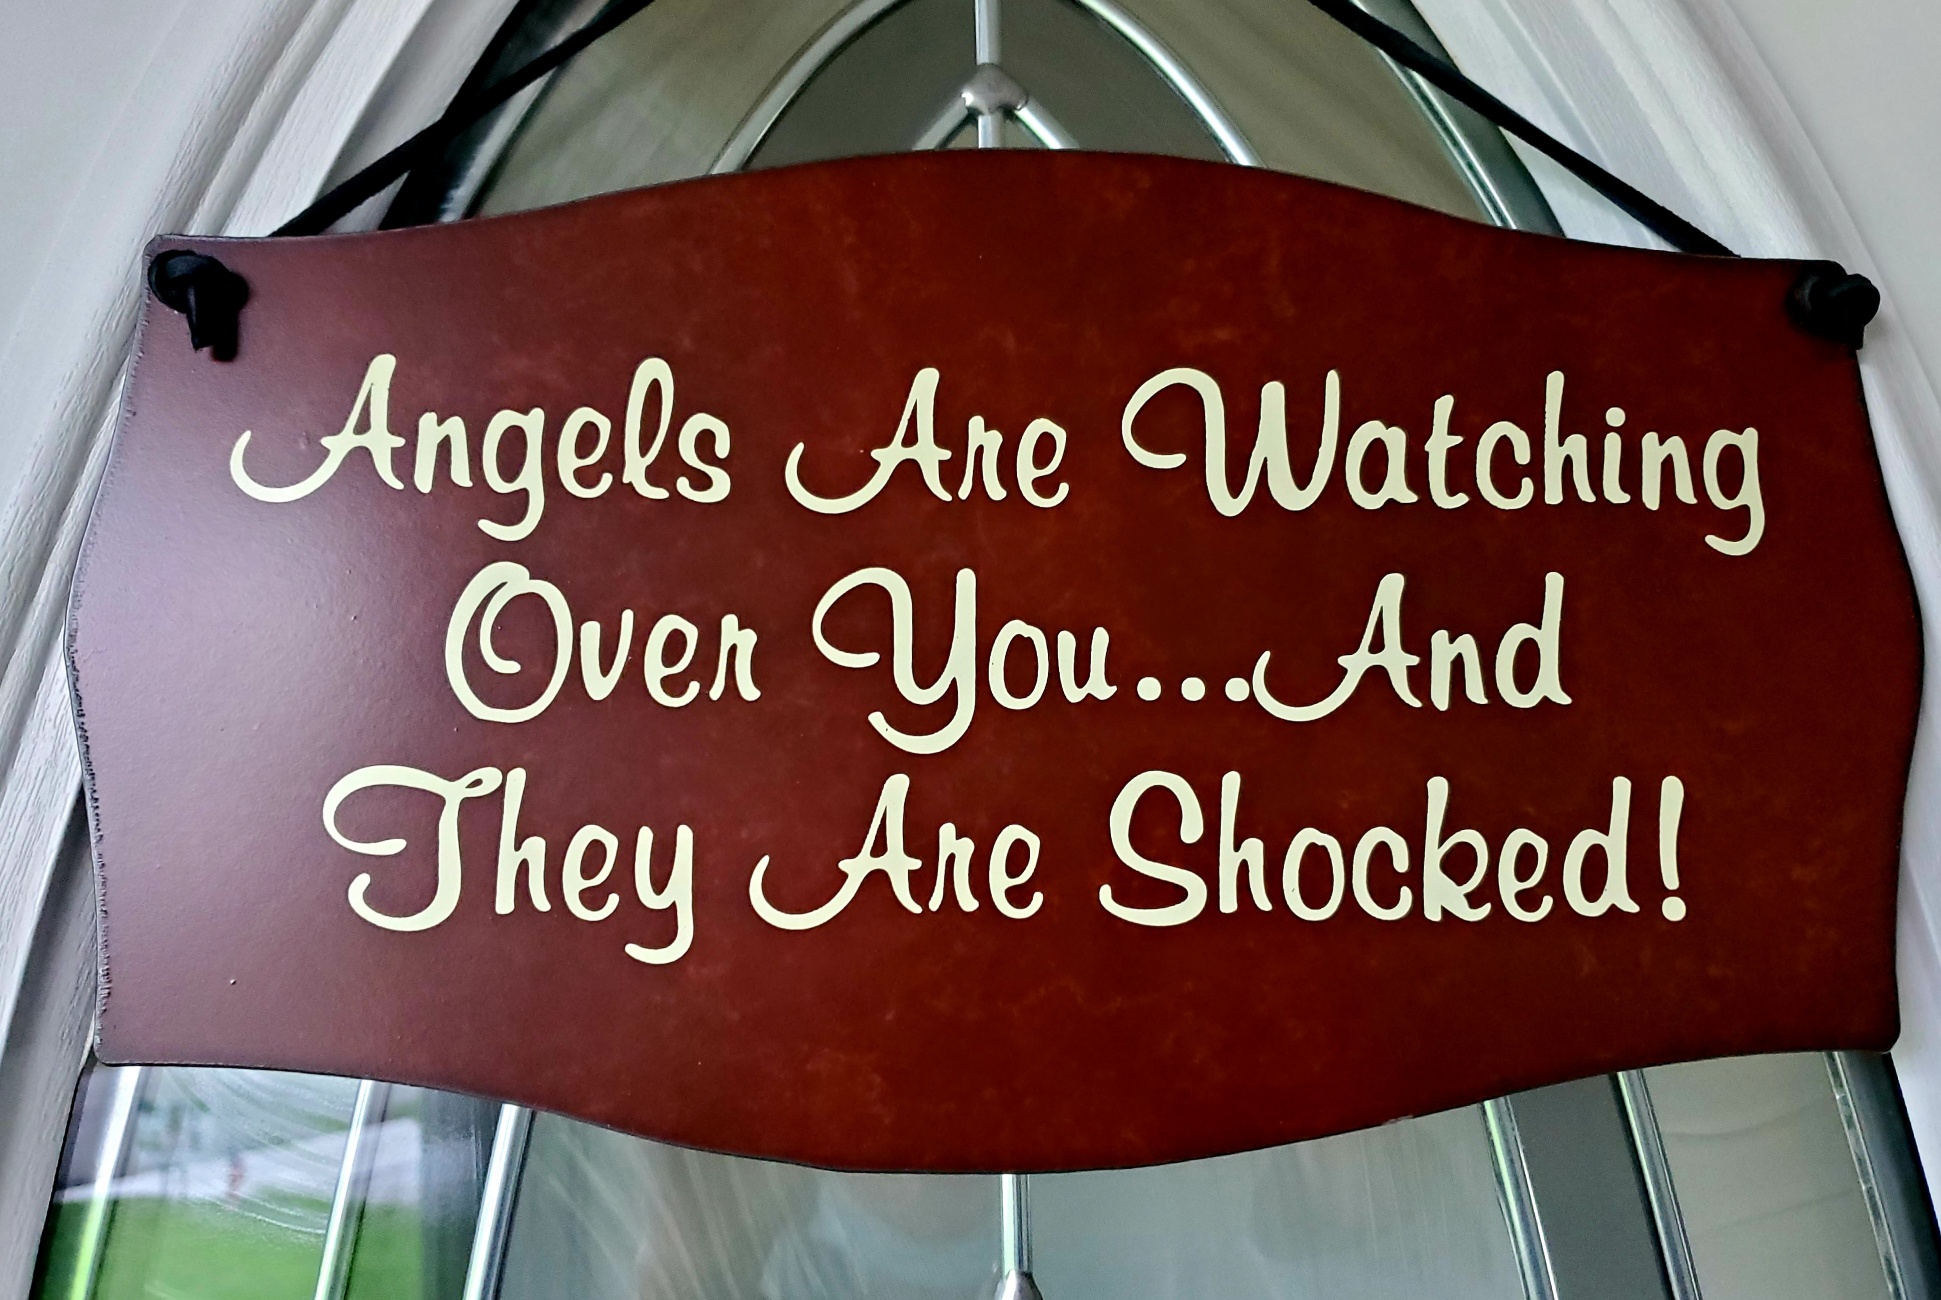 Angels_Just_Know_The_Facts749lm.jpg